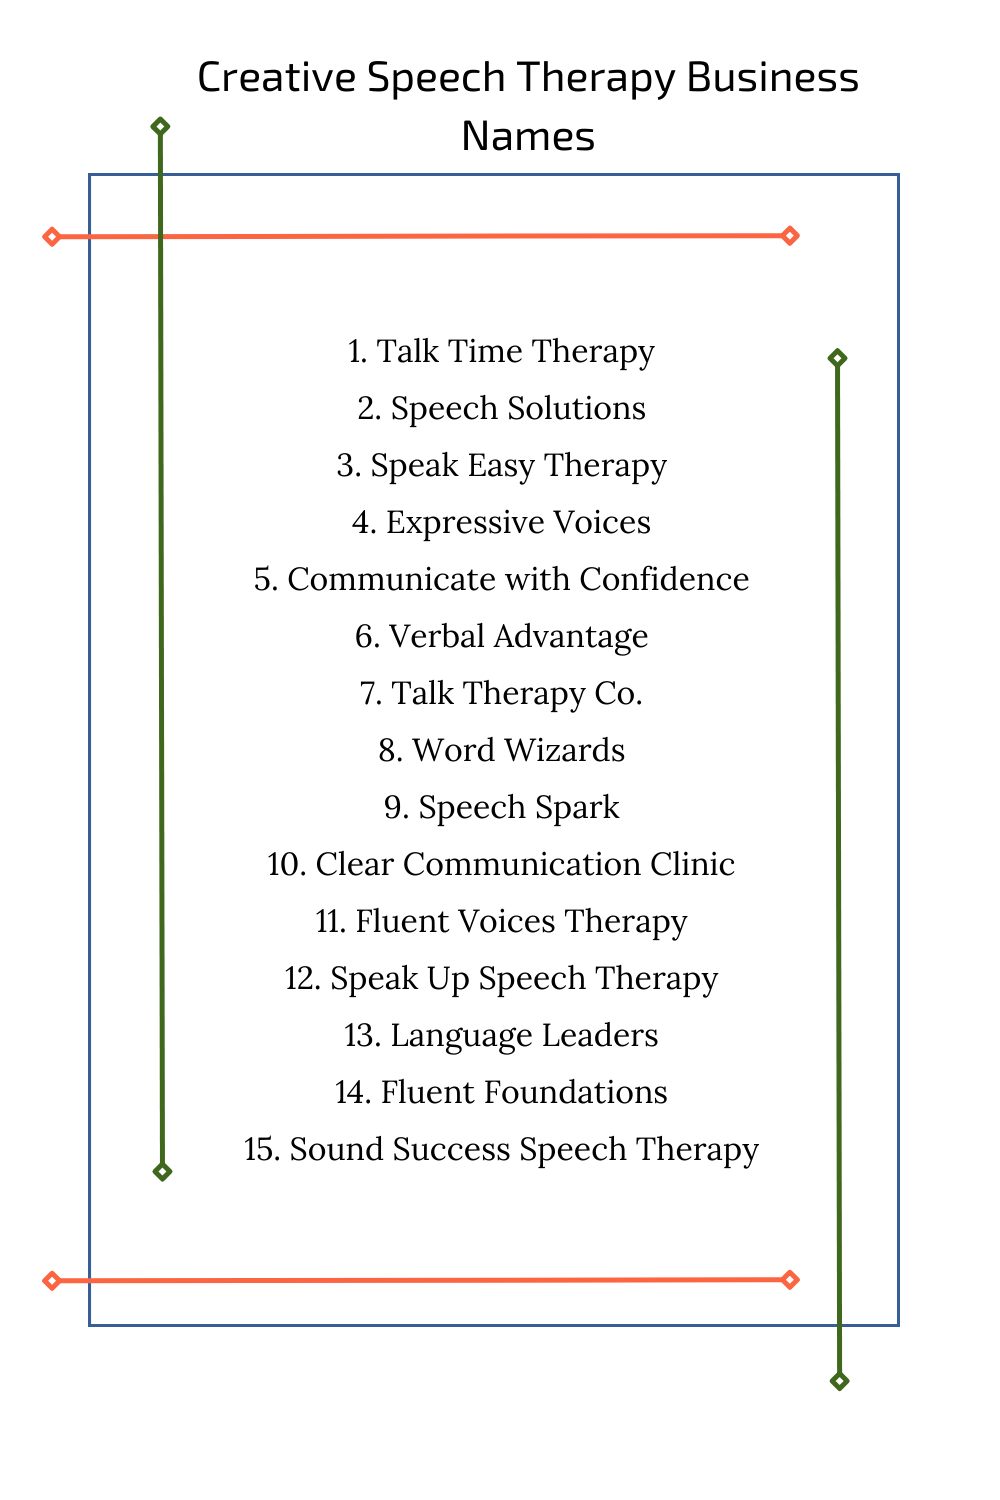 Creative Speech Therapy Business Names